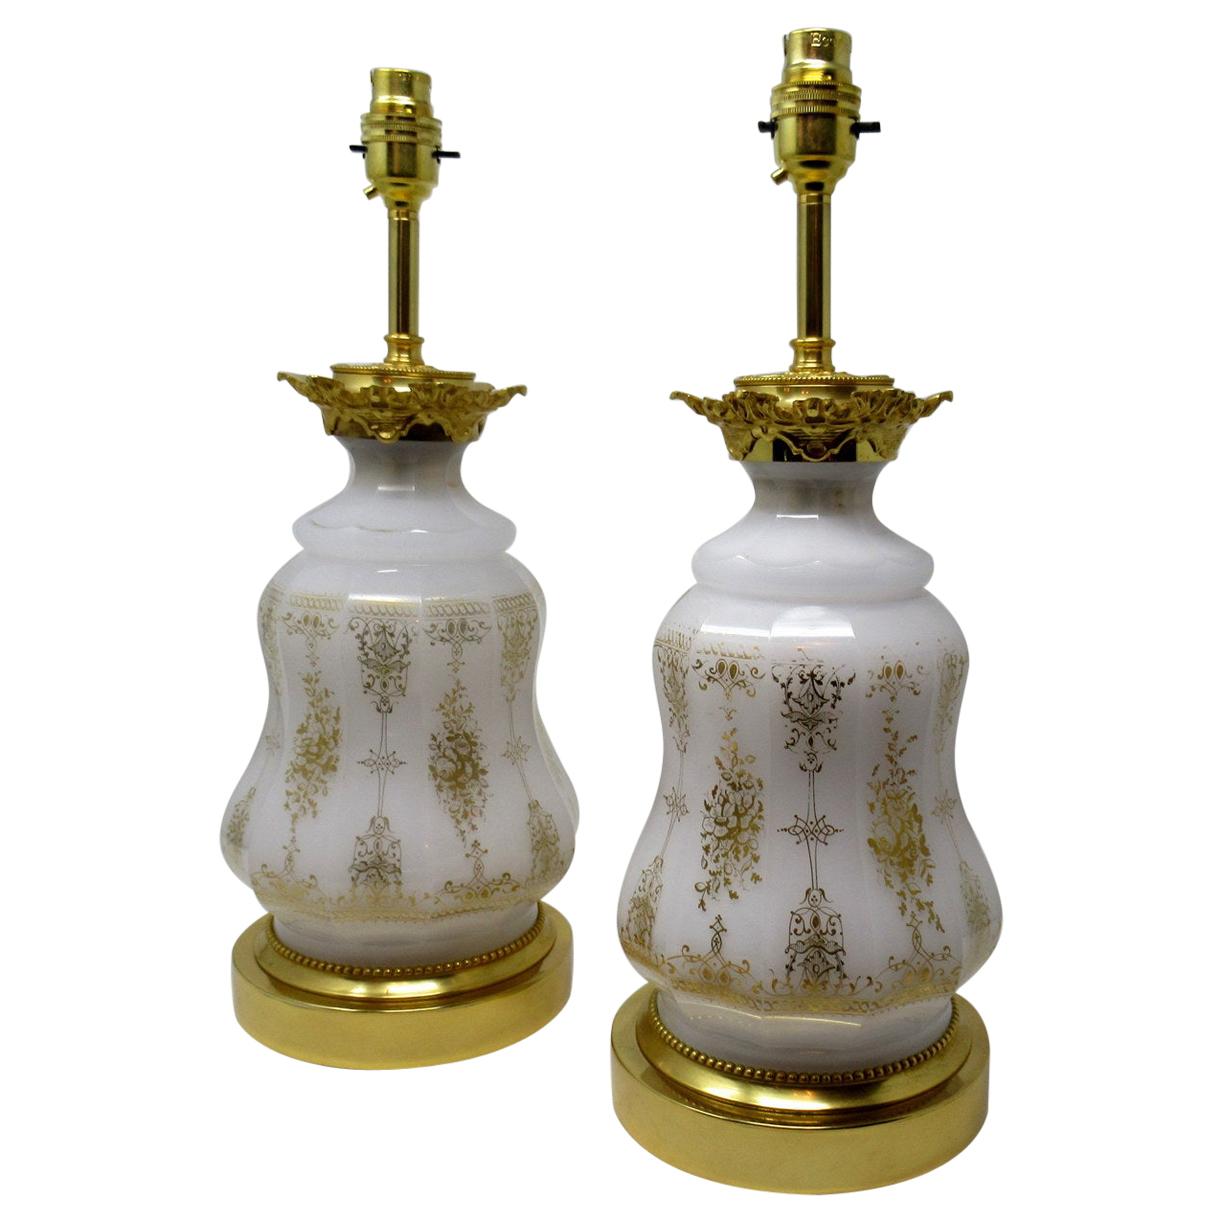 Pair of French Patinated Bronze, Ormolu Electric Table Lamps, Late 19th Century